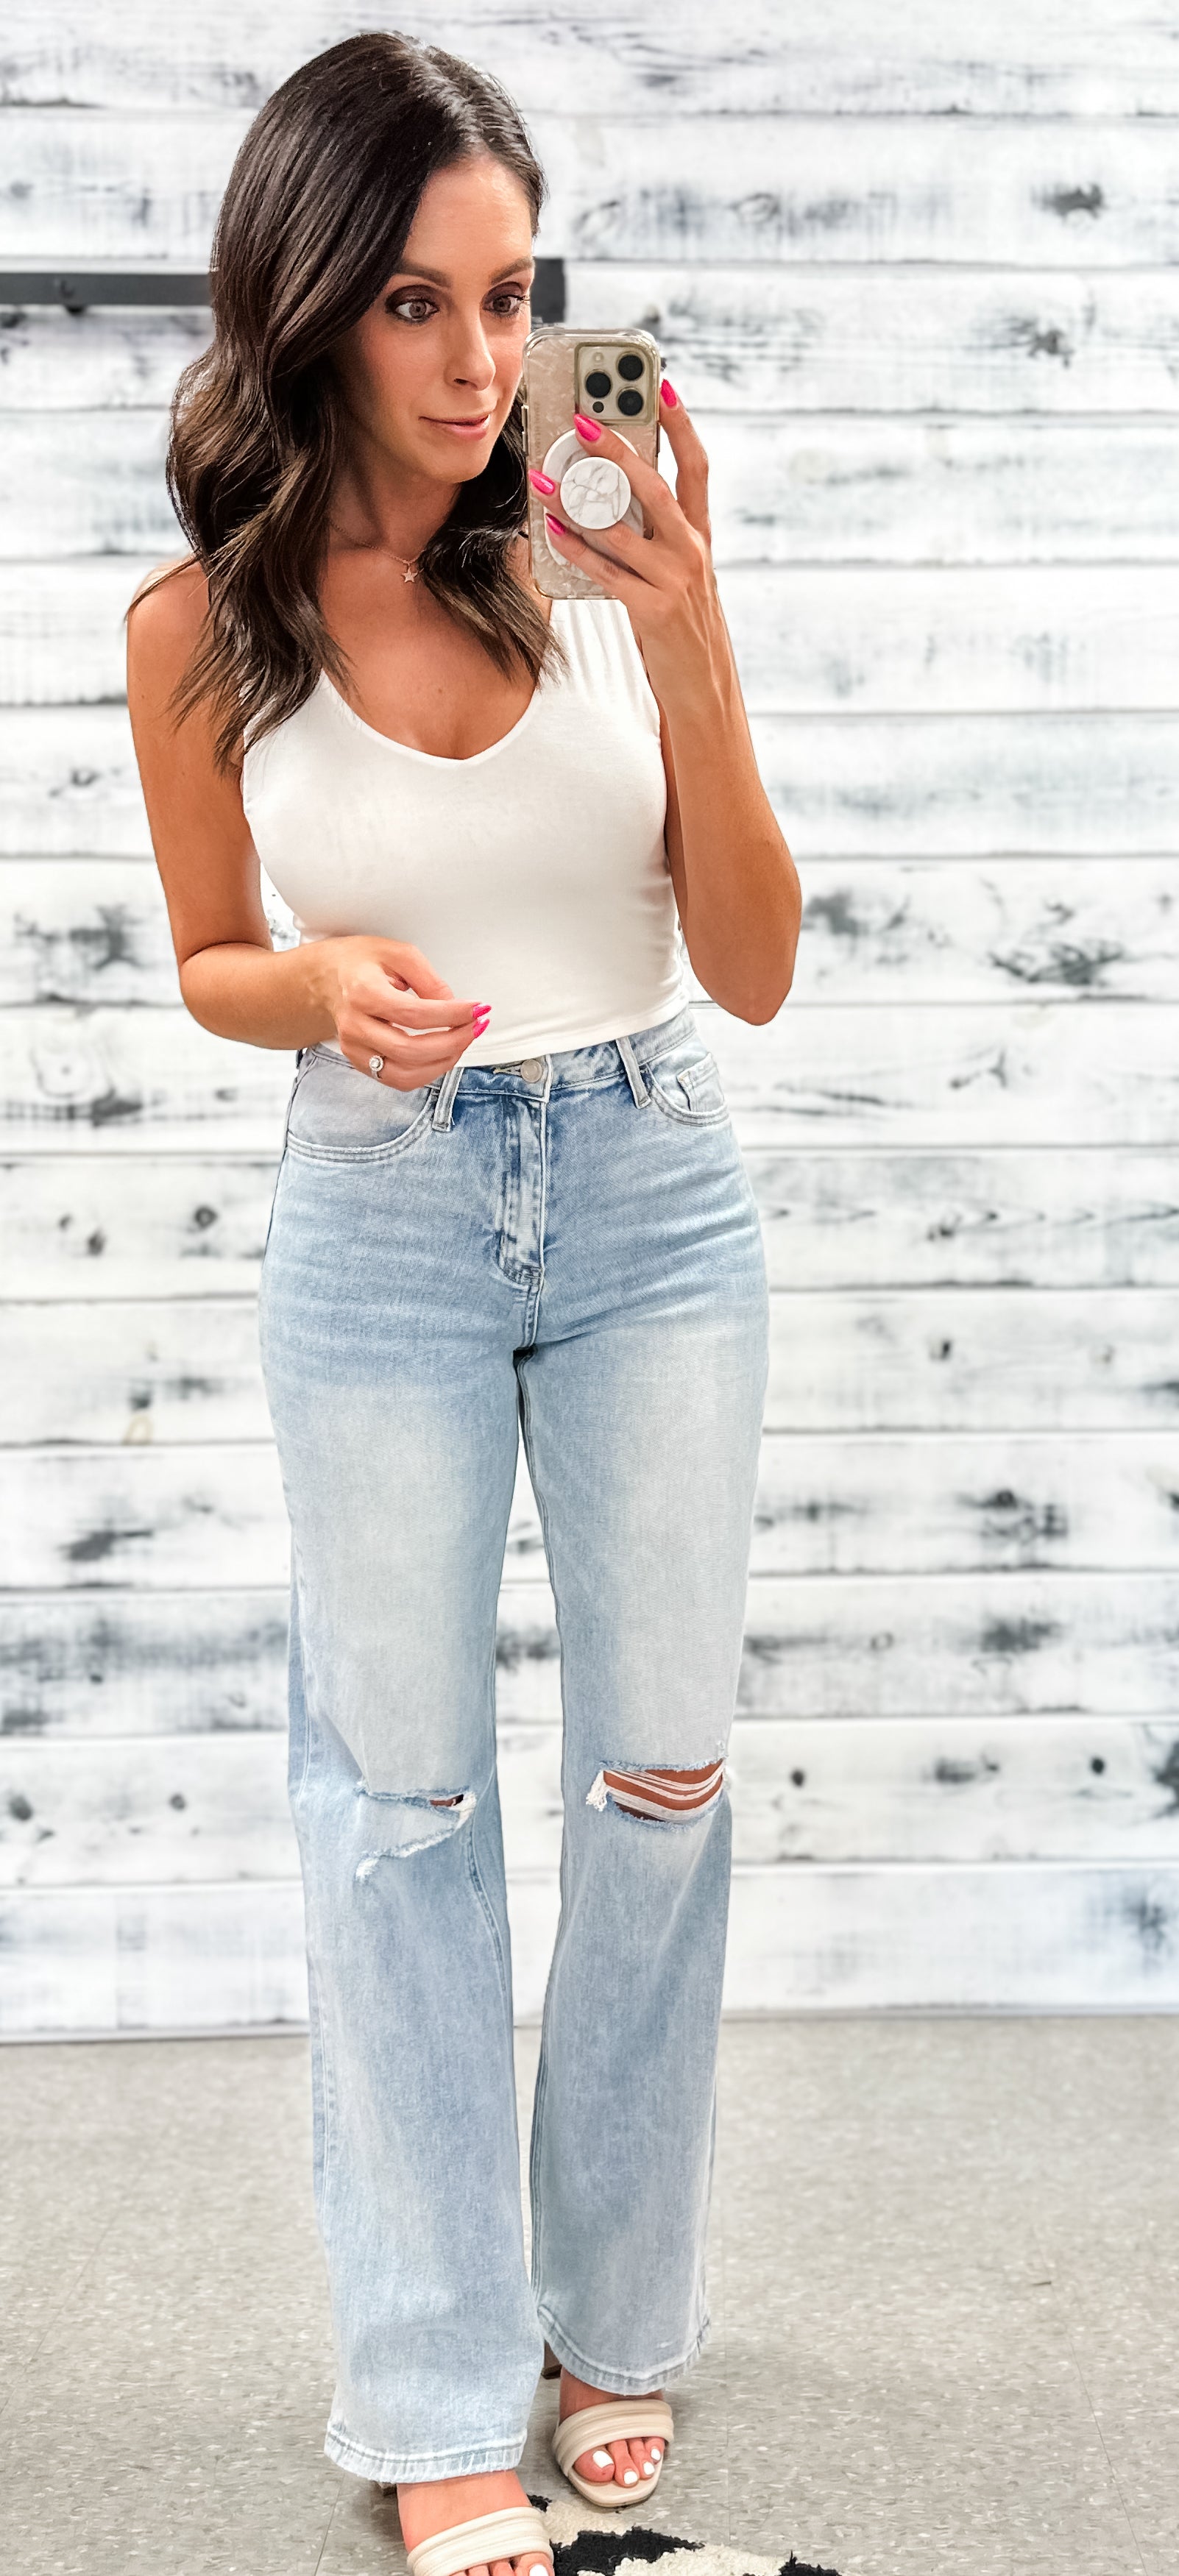 Premium Denim High Waisted Mom Jeans in Distressed Light Mid-Wash - Grace  and Lace